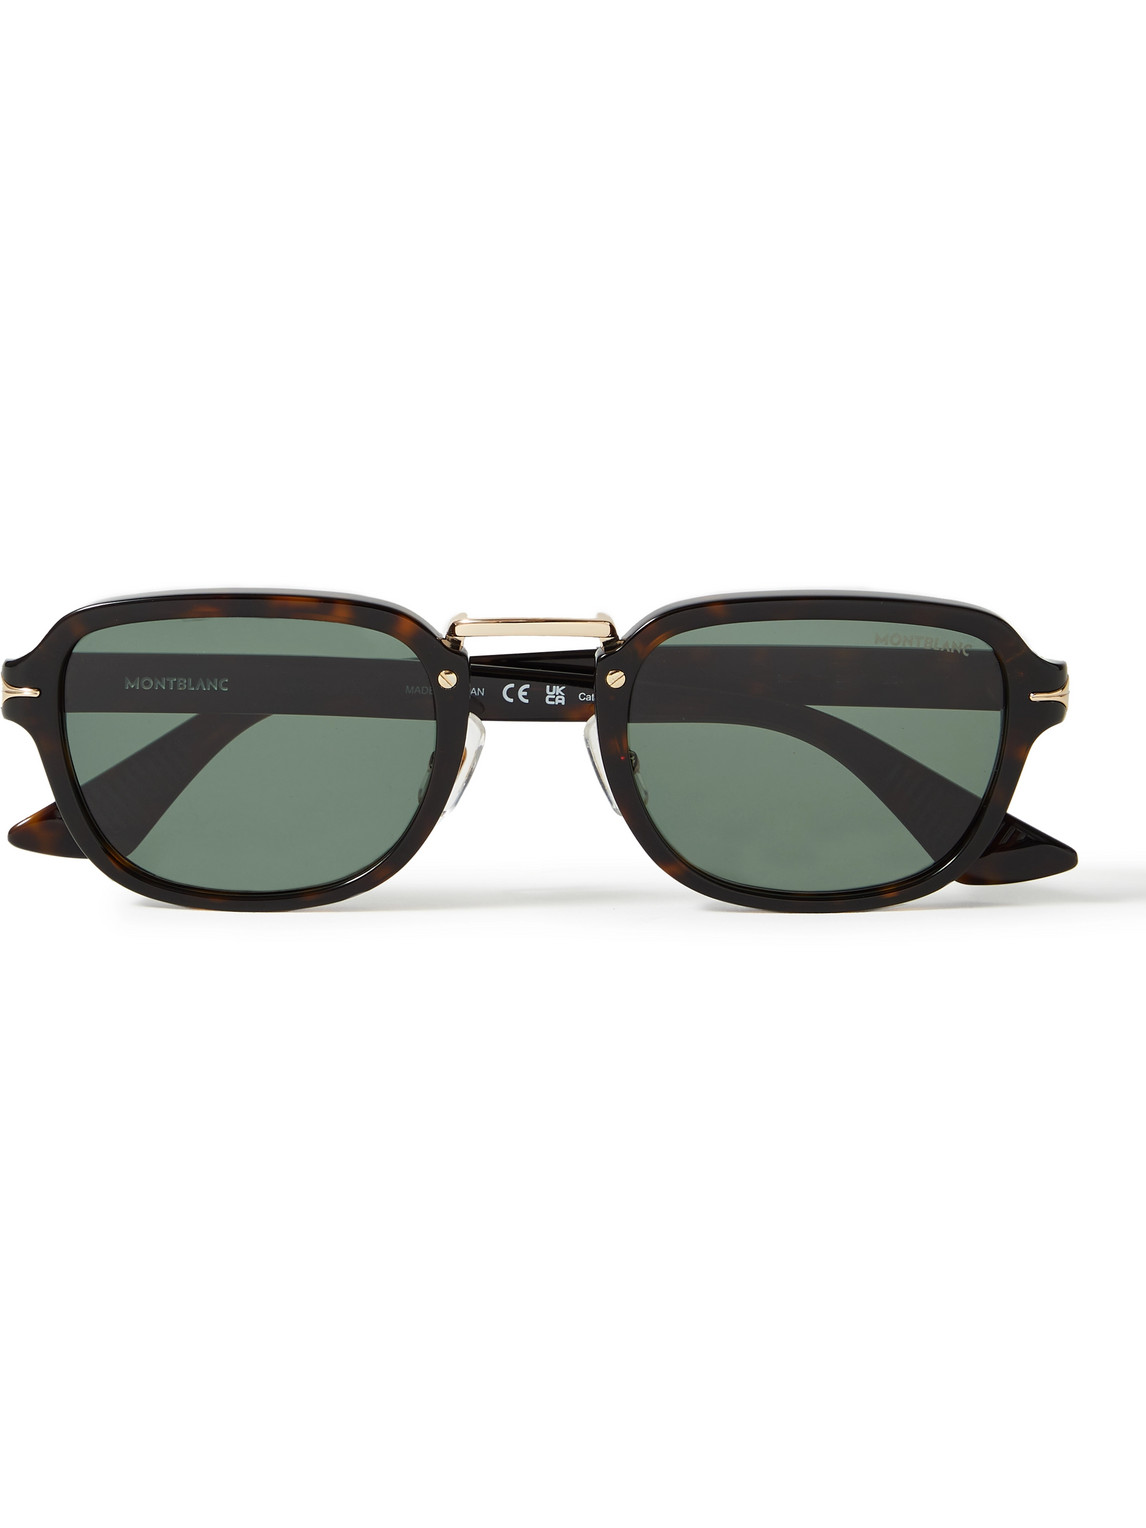 Montblanc Square-frame Tortoiseshell Acetate And Gold-tone Sunglasses In Black